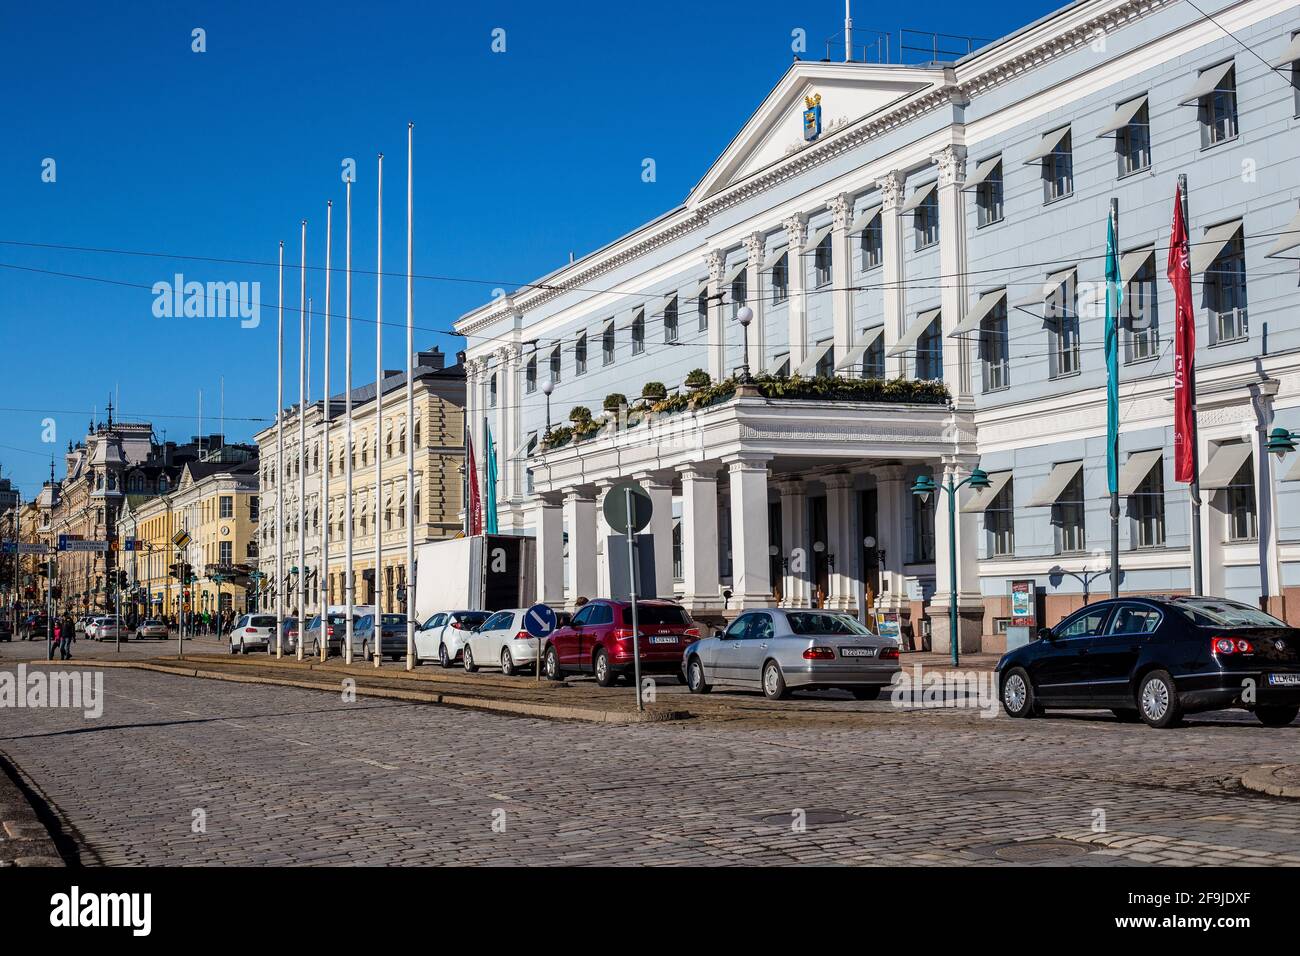 Helsinki, Finland - March 11, 2017: View of Traditional Buildings in the South Harbour on a Sunny Day Stock Photo